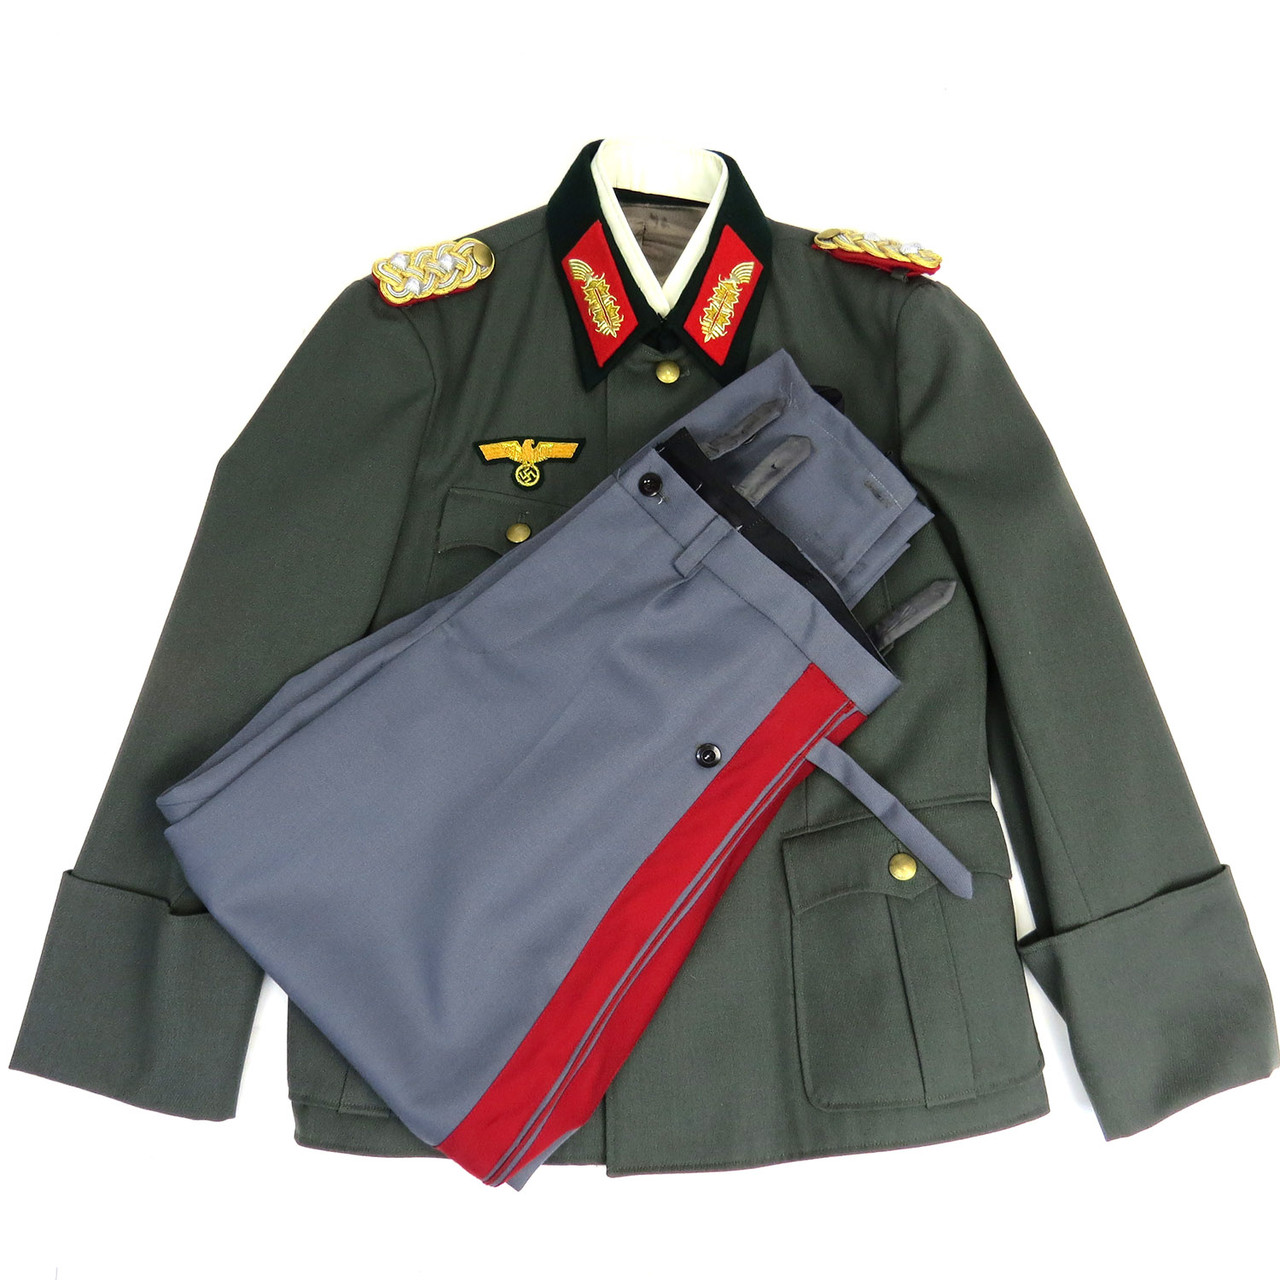 Army General Uniform From Major TV Series (Large)